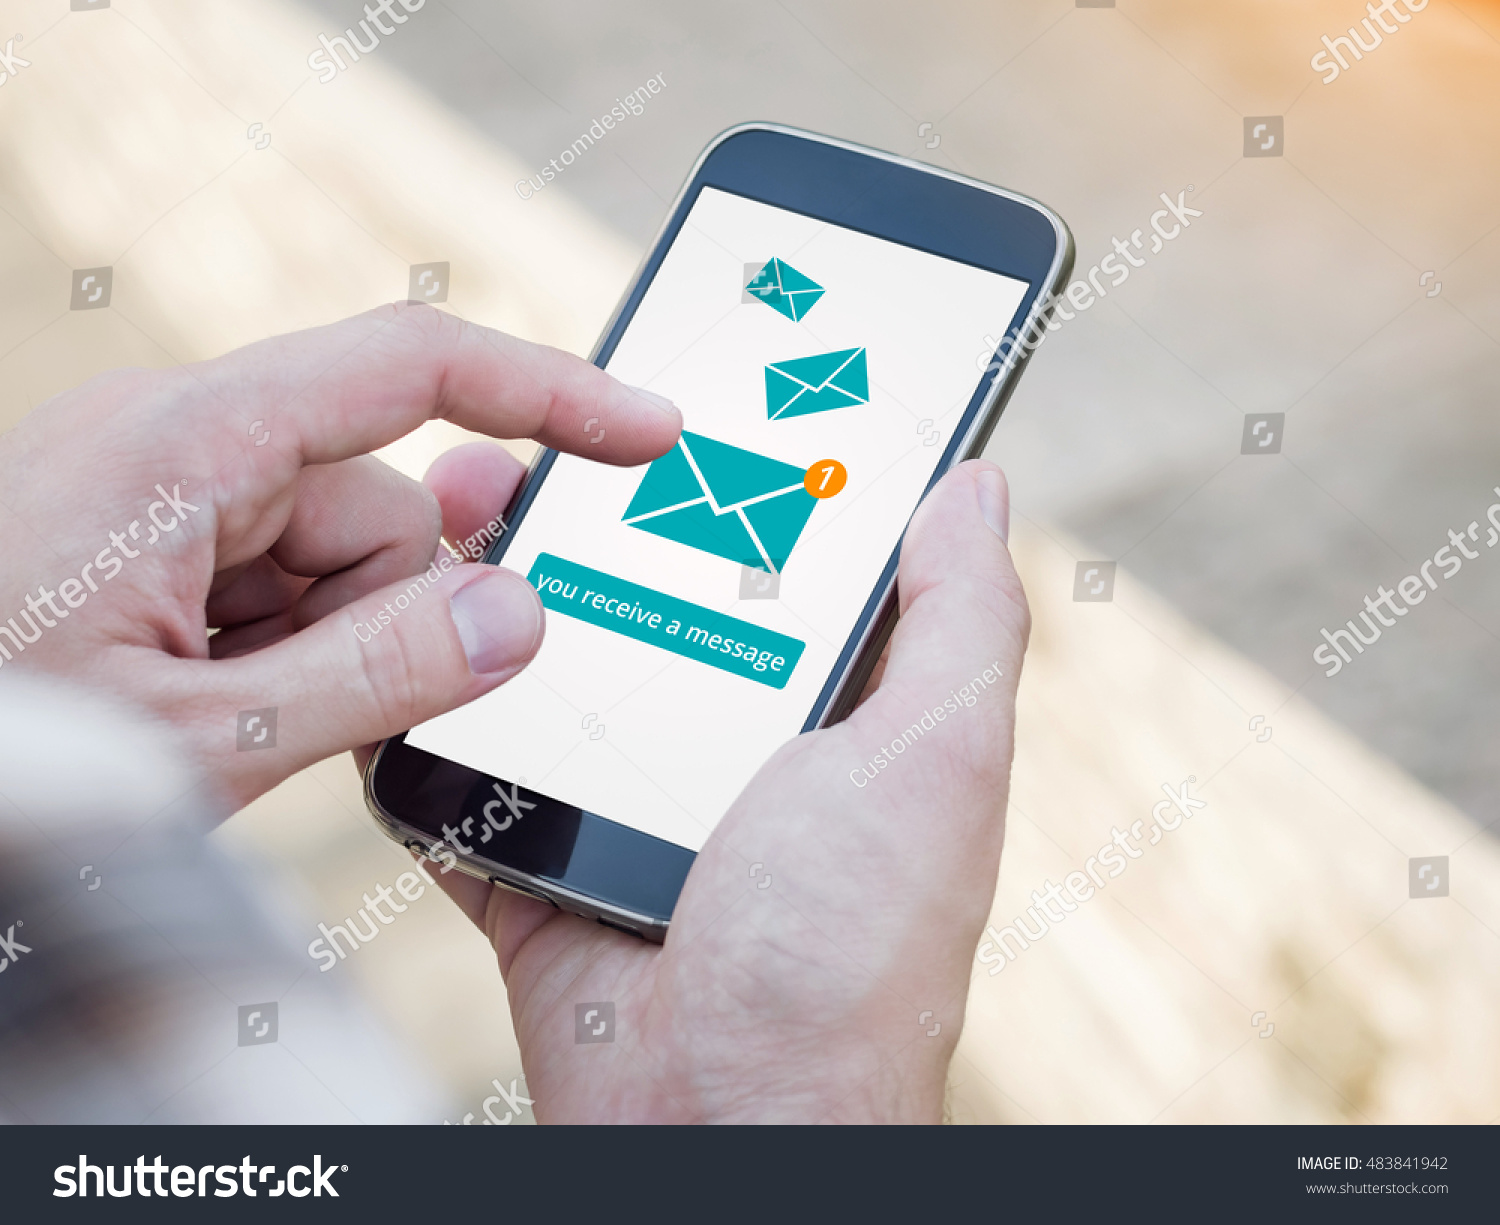 Email app on smartphone screen. You receive a message, New message is received. Man's Hand holding a smartphone #483841942